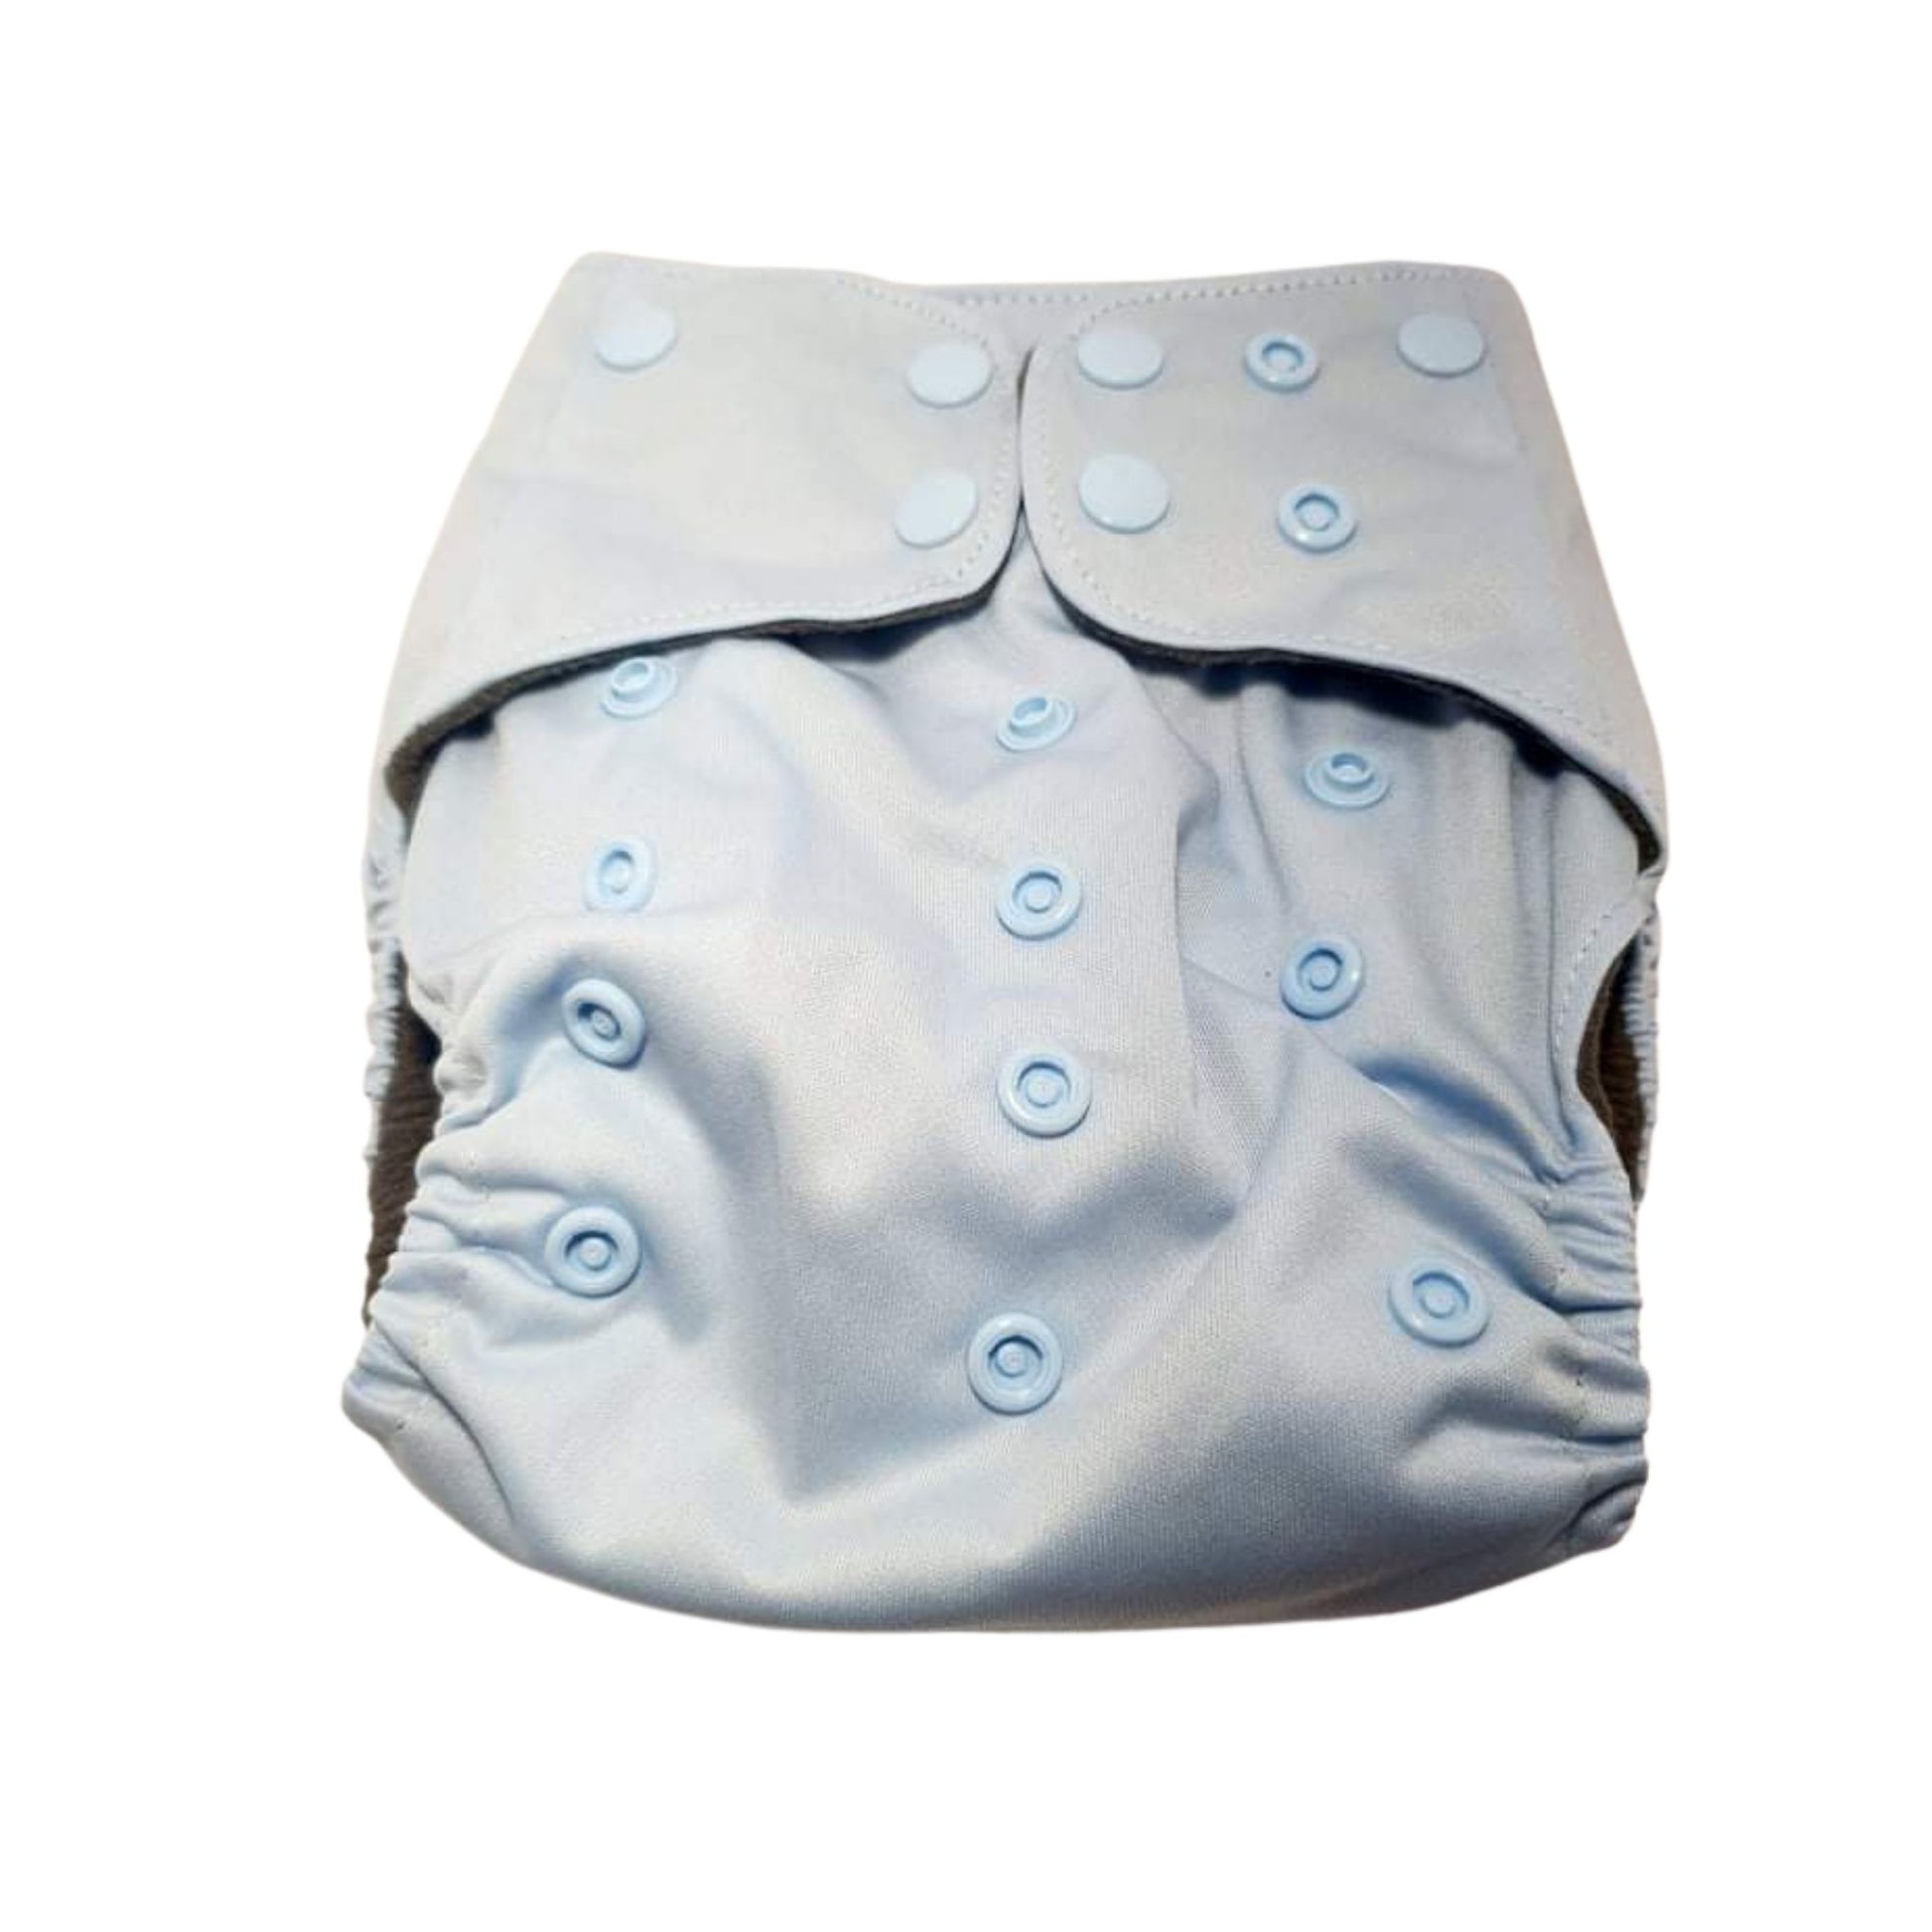 Features & Materials:  Nappy can be adjusted to desired size by snapping onto different rows of buttons on nappy.  Washable, waterproof and breathable.  Nappy comes with pocket to place insert!  Dual gusset assists to prevent leakage and containment   Outer layer polyester with waterproof and breathable TPU, inner layer bamboo charcoal which helps keep baby dry, whilst wicking away moisture. 